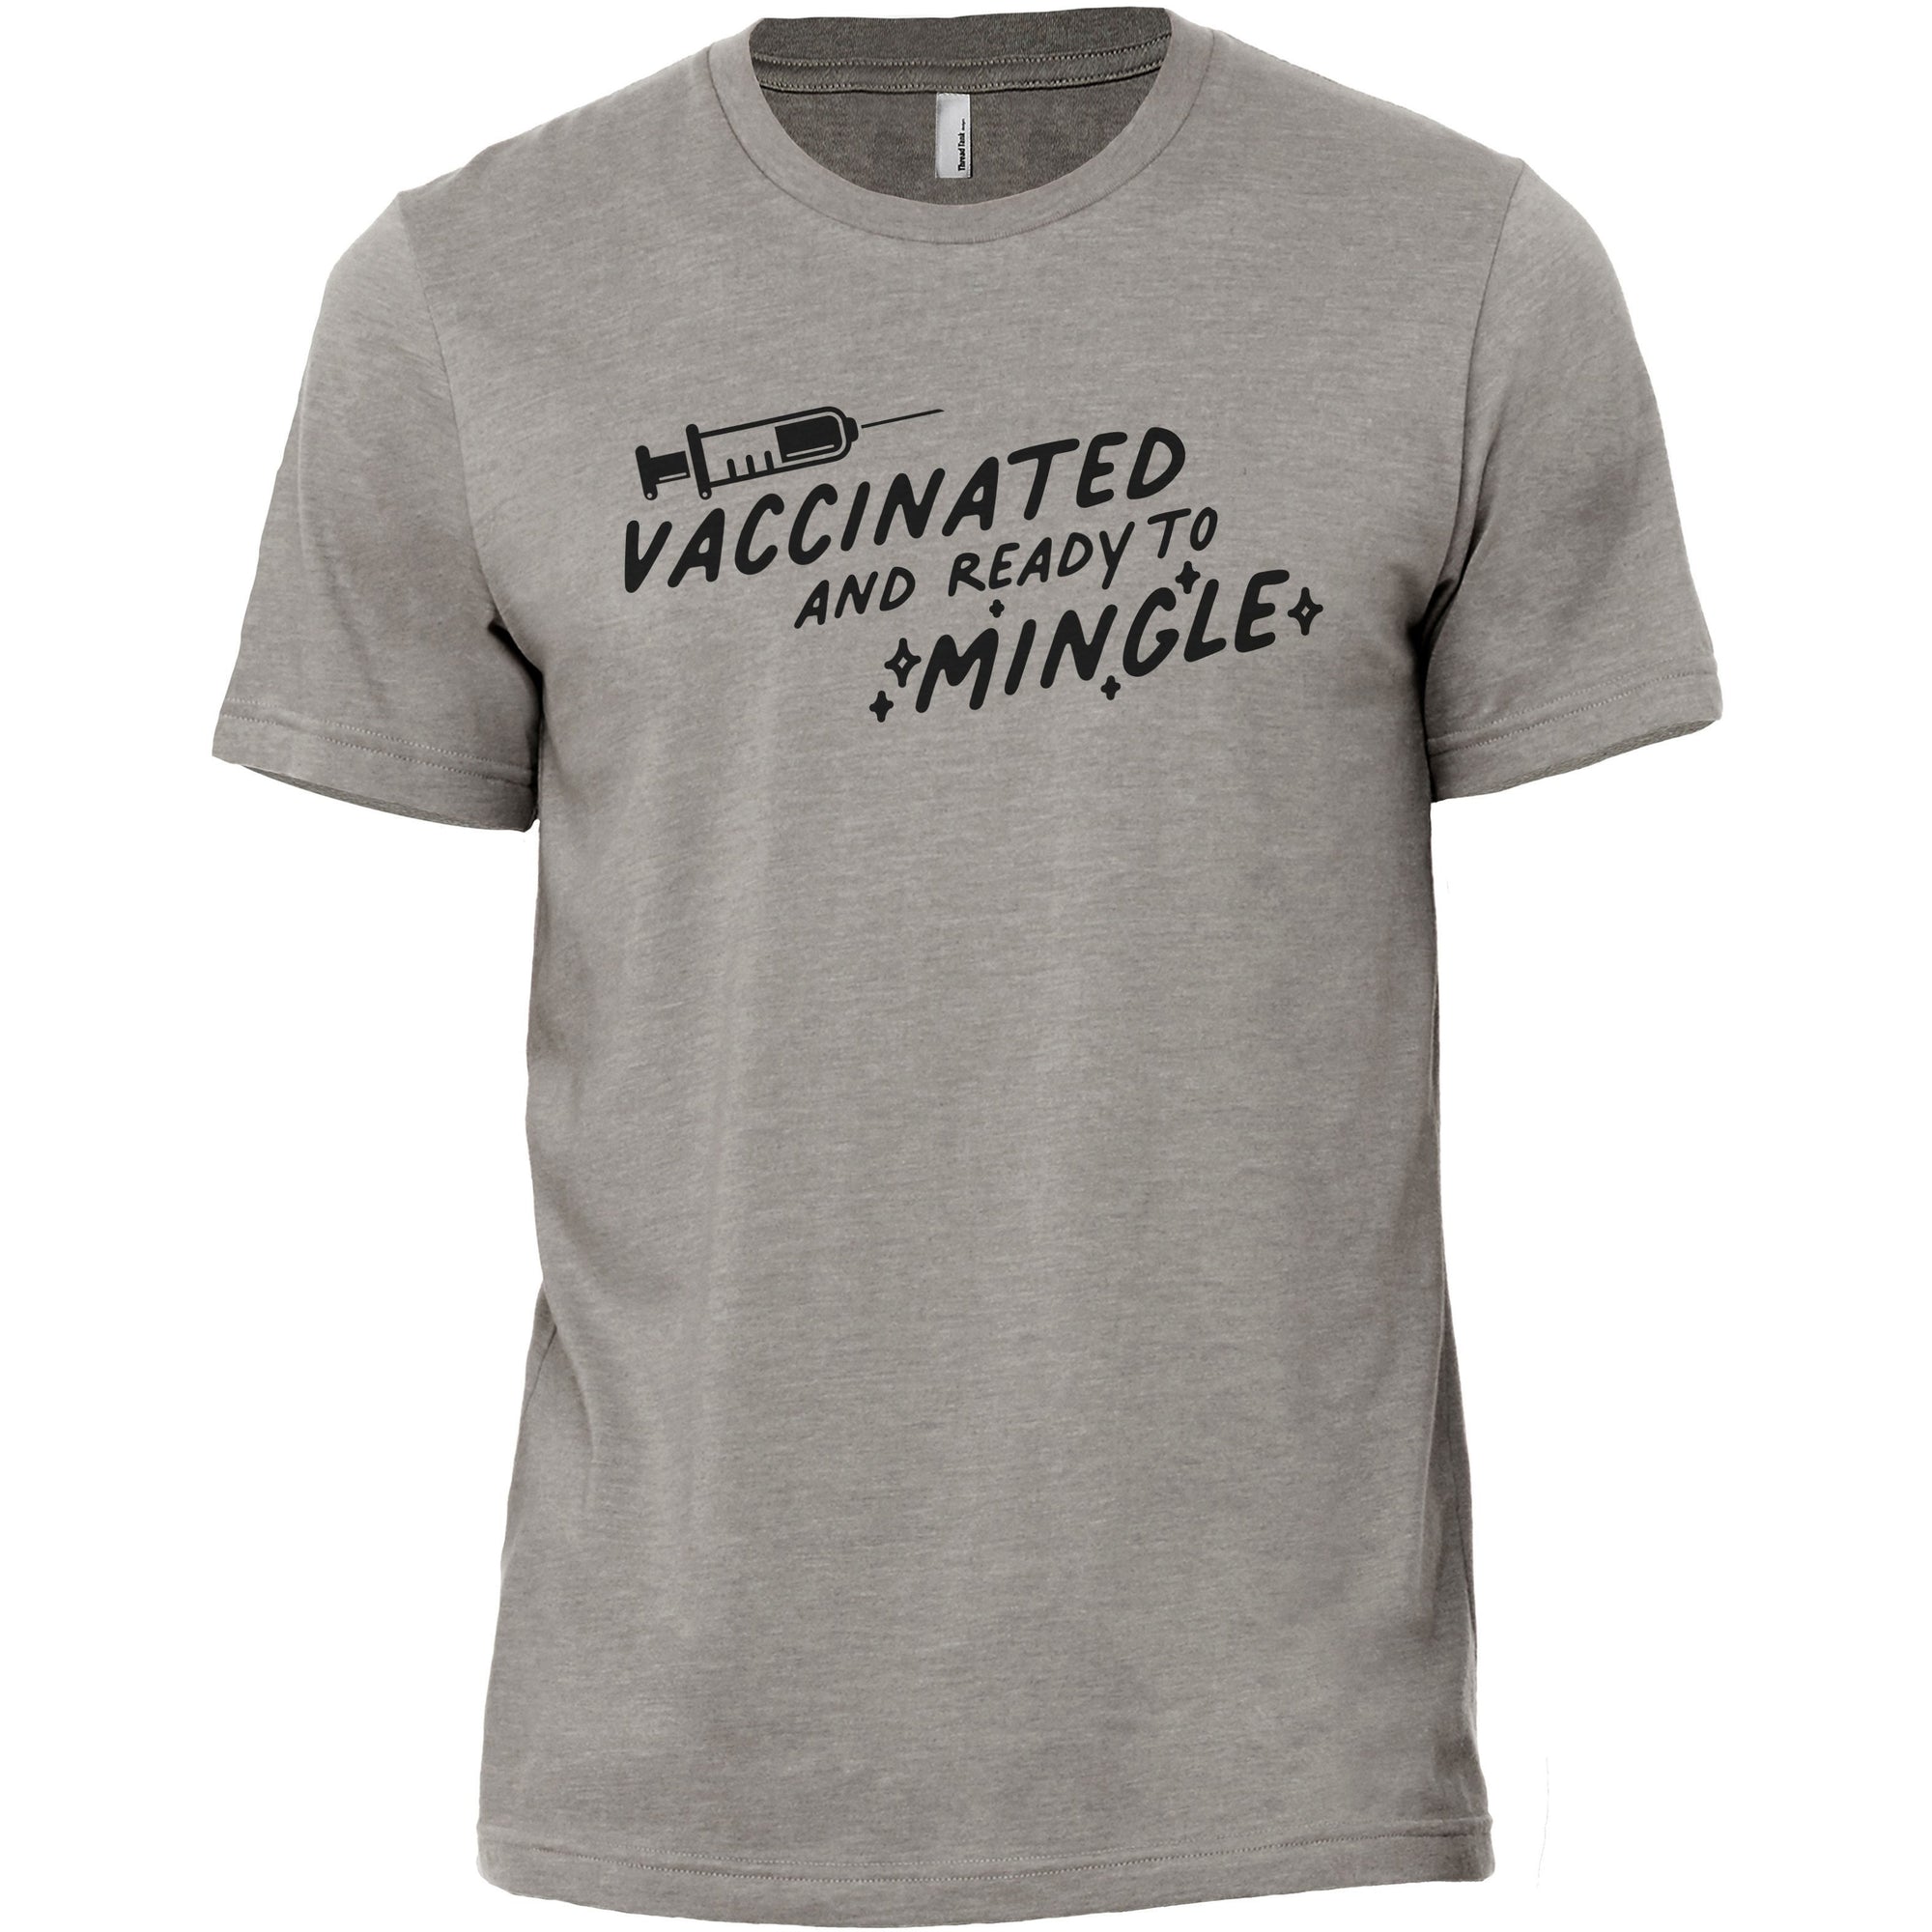 Vaccinated And Ready To Mingle - Stories You Can Wear by Thread Tank